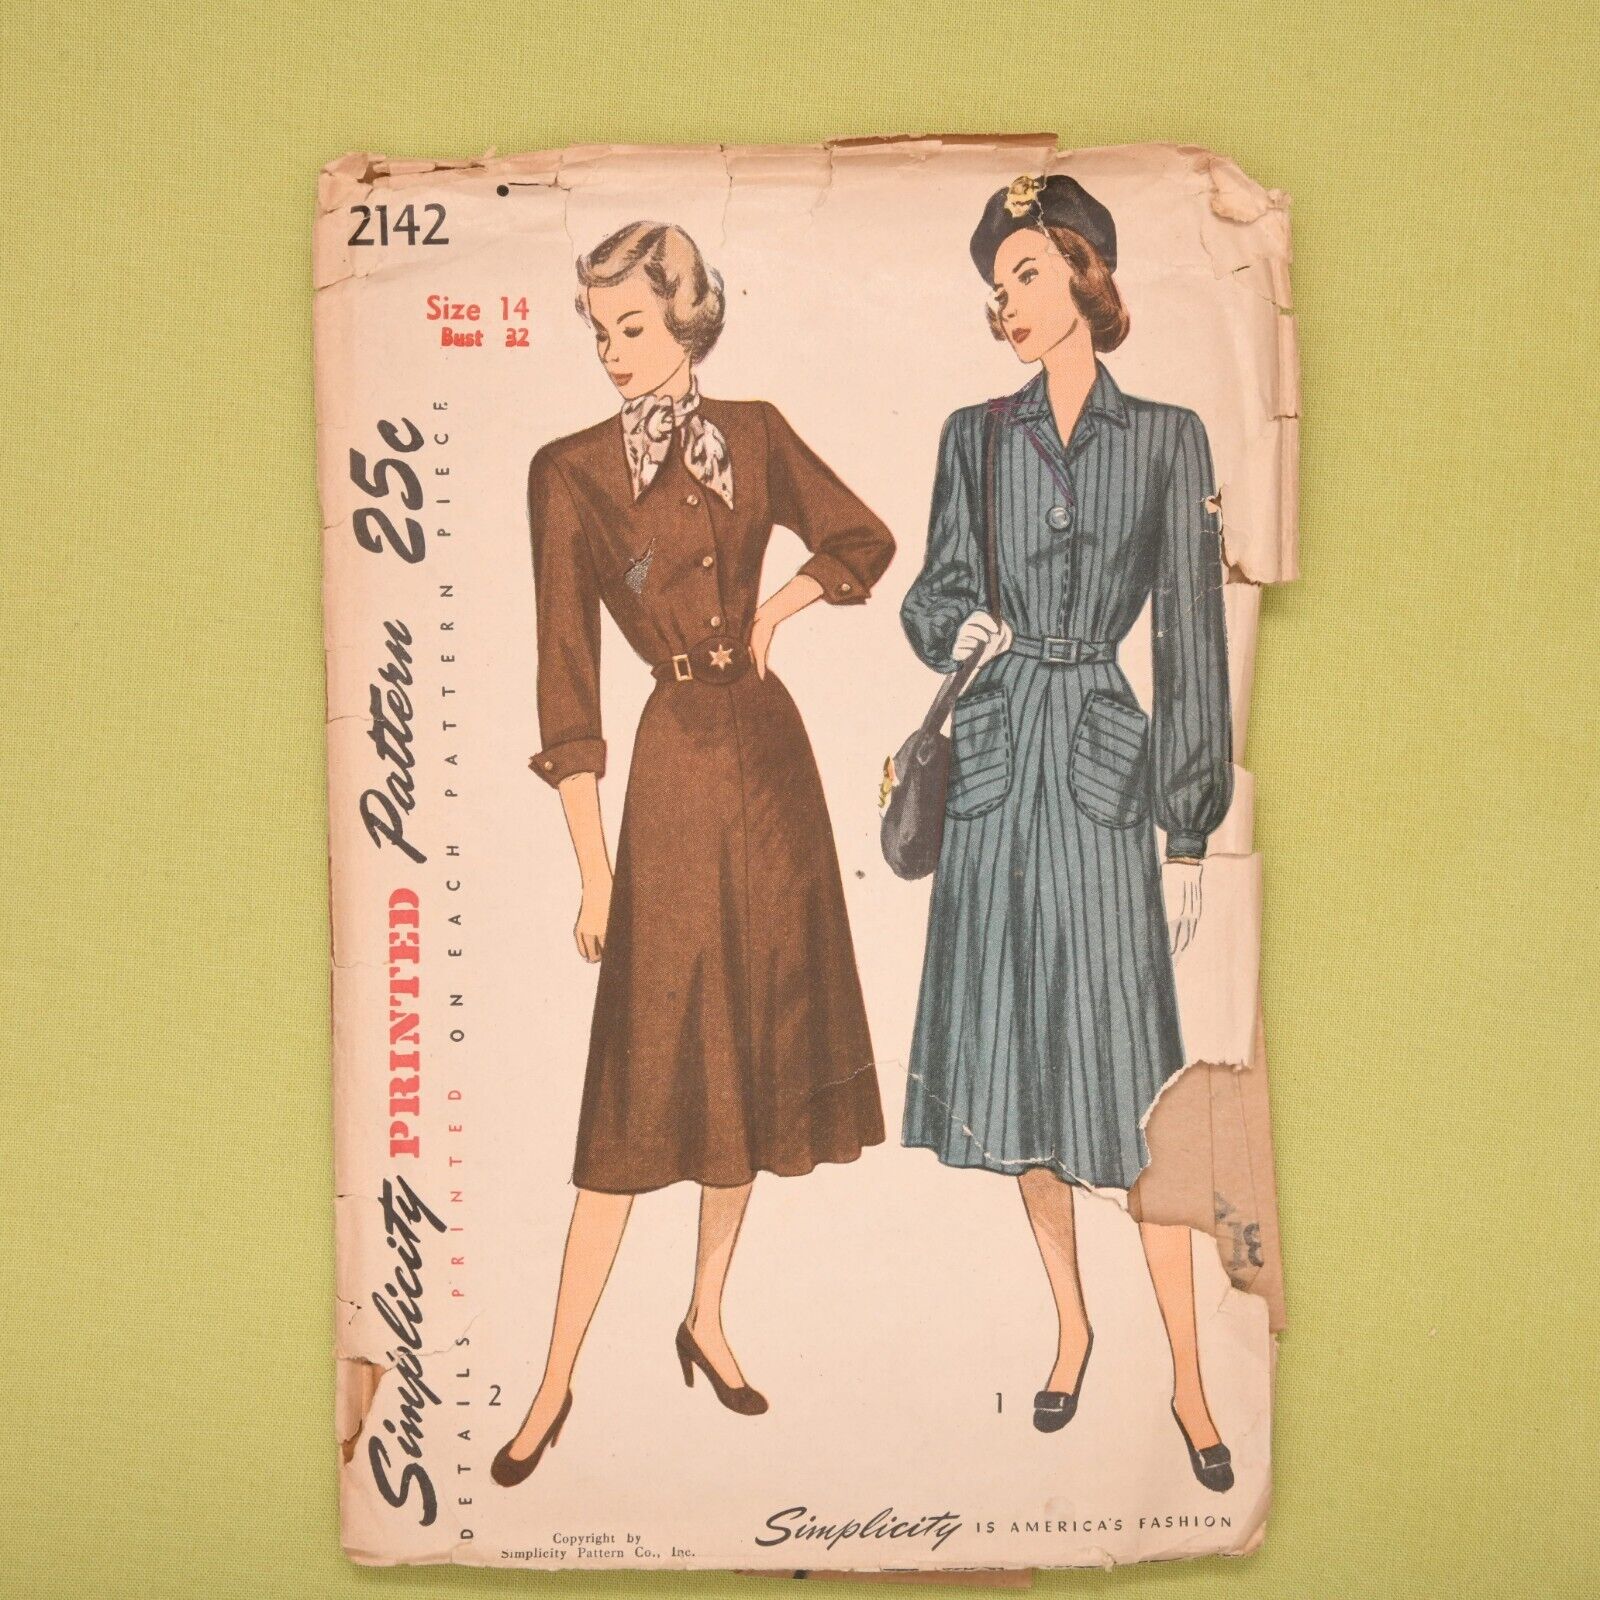 Vintage 1940s Simplicity One Piece Dress Pattern - 2142 - Bust 32 - Complete